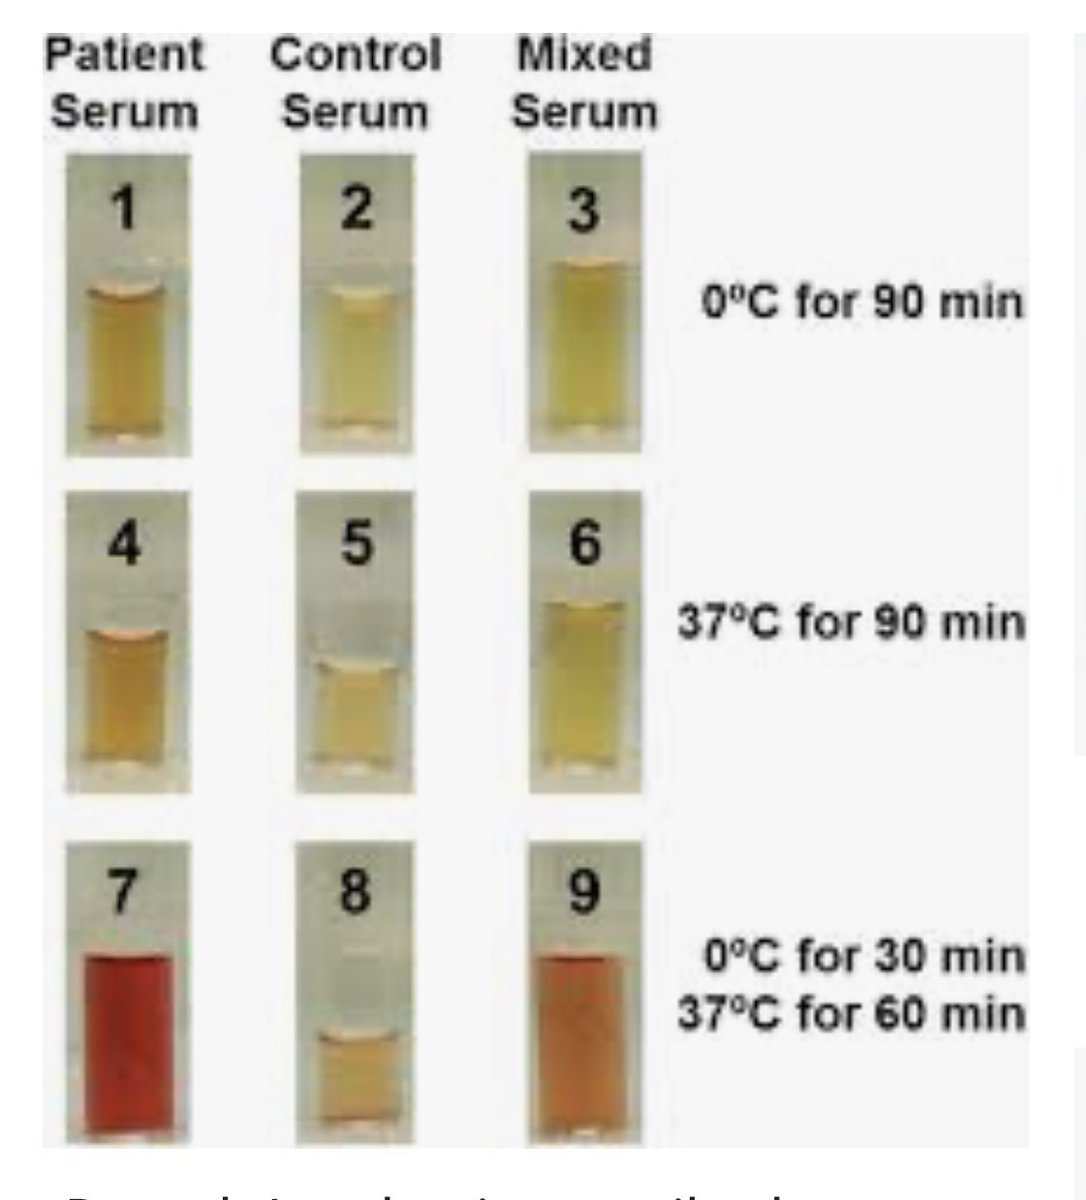 To test for DL, 3 specimens are used. 1. Patients serum 2. Donor serum3. Mixture P+ RBCs are added to each Samples are kept at 4C, then heated to 37C and visualized for hemolysis. Negative controls are kept at 4C and 37C throughout. 8/n